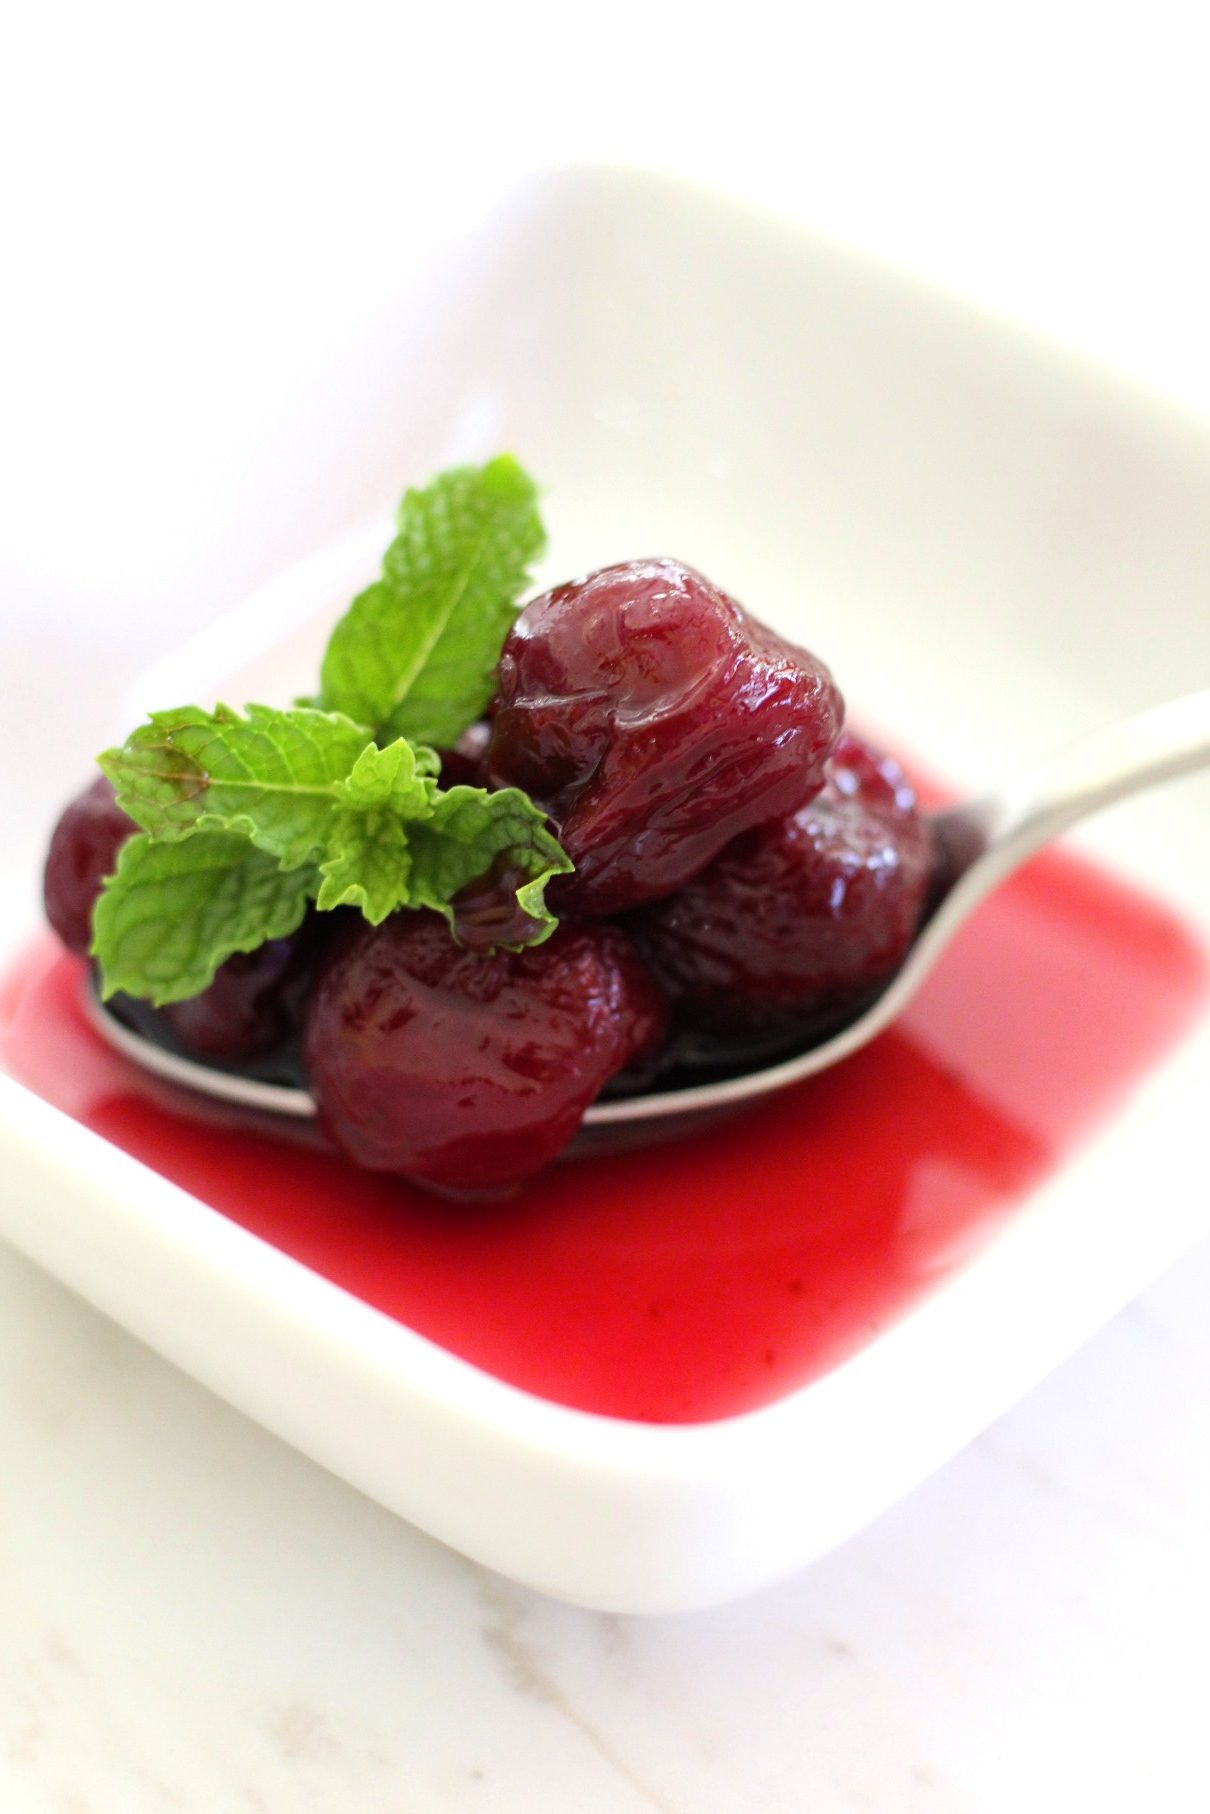 A serving of Cherry Spoon Sweet preserve on a spoon, garnished with mint.